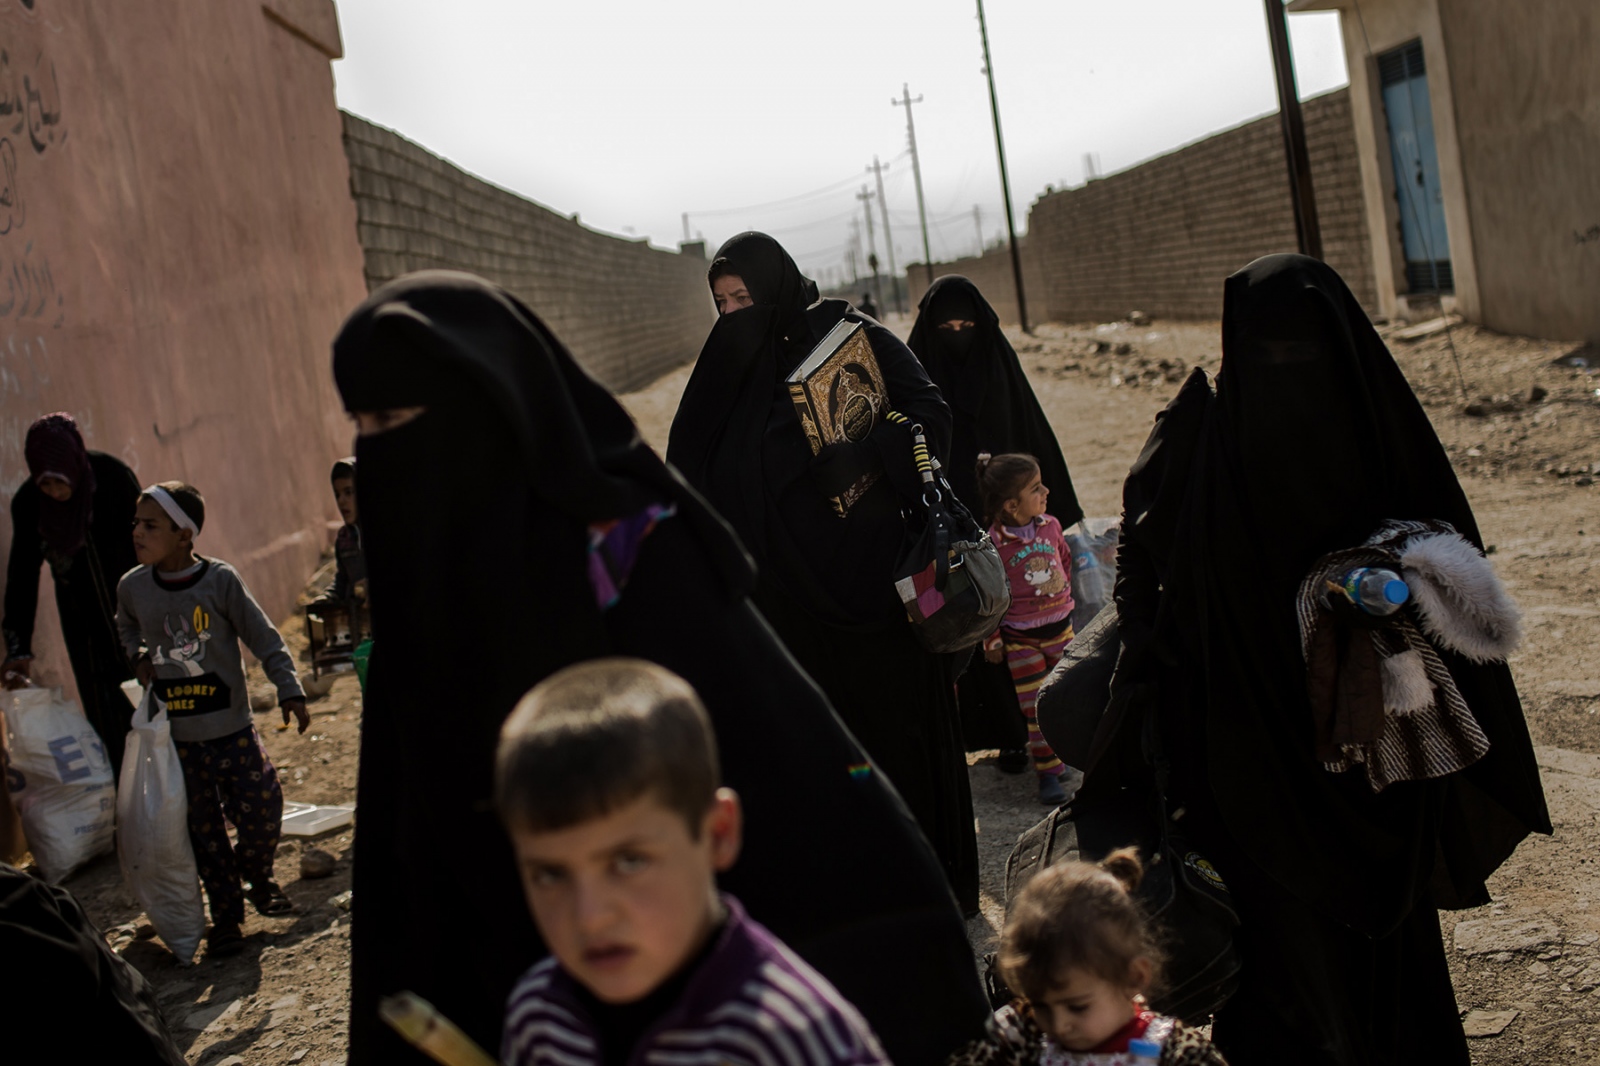 The Road to Mosul